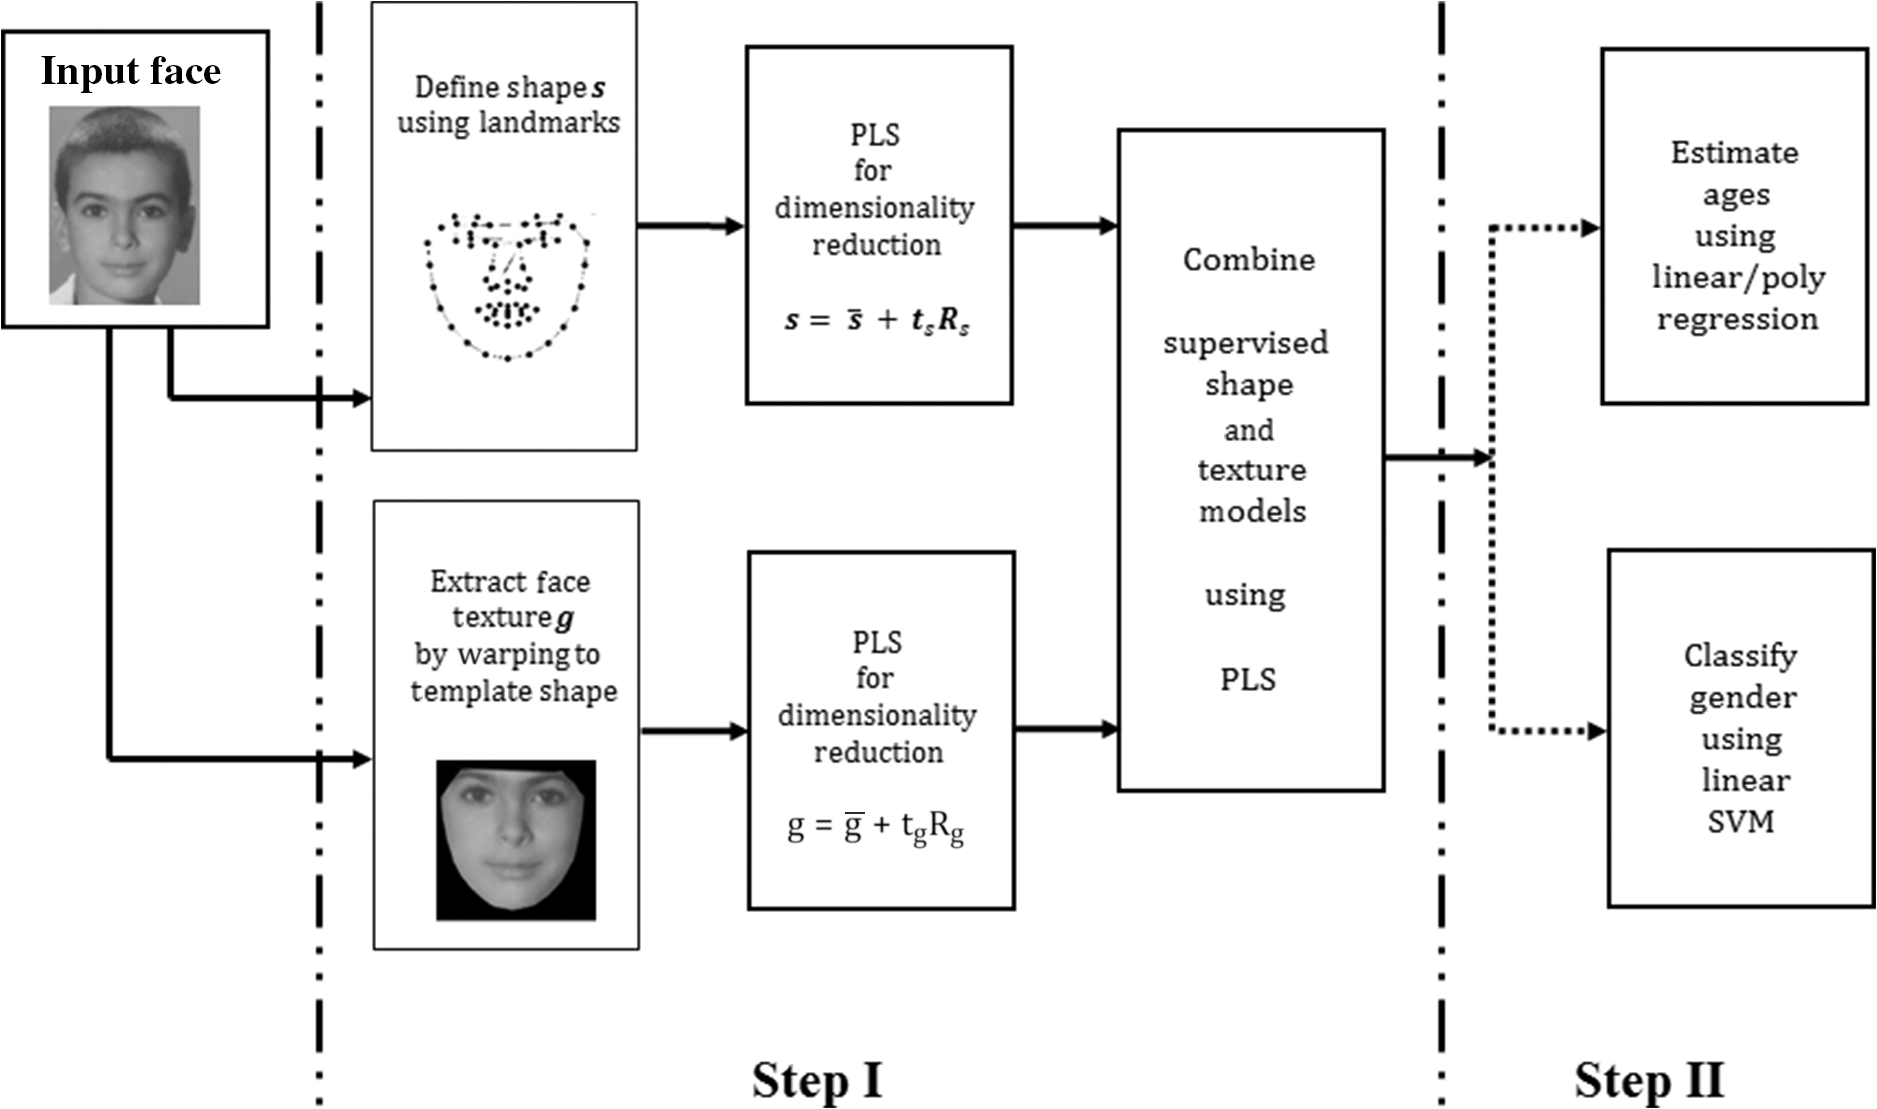 Automatic Age And Gender Classification Using Supervised Appearance Model